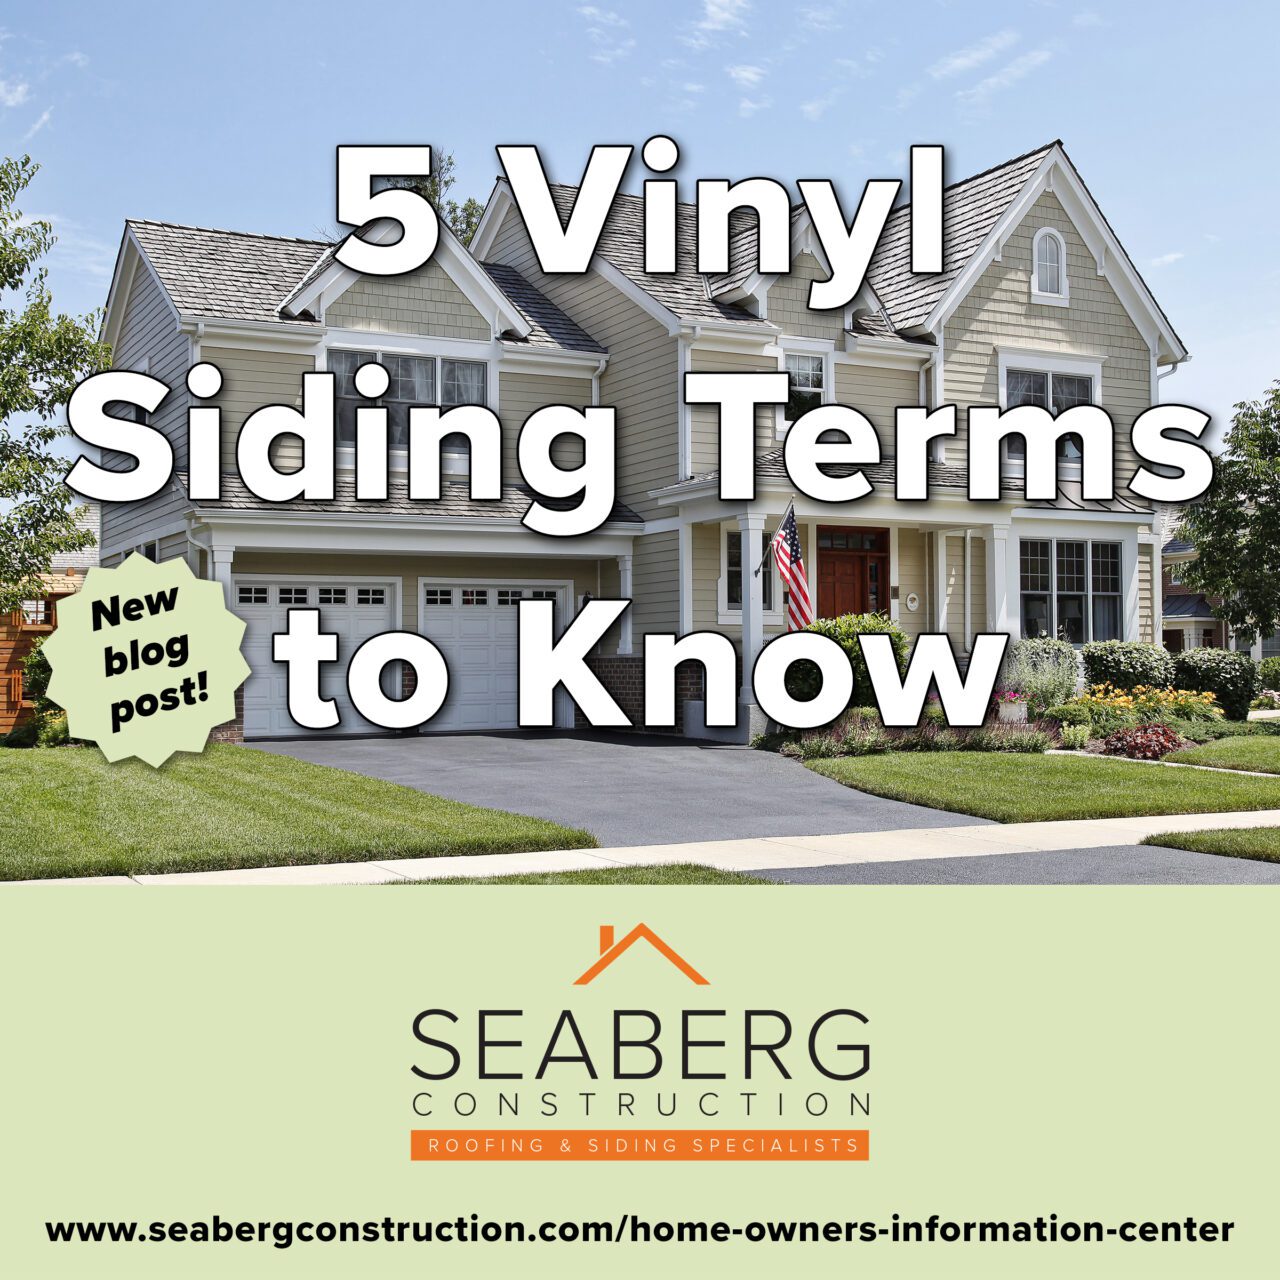 Seaberg Construction Blog: 5 Vinyl Siding Terms to Know